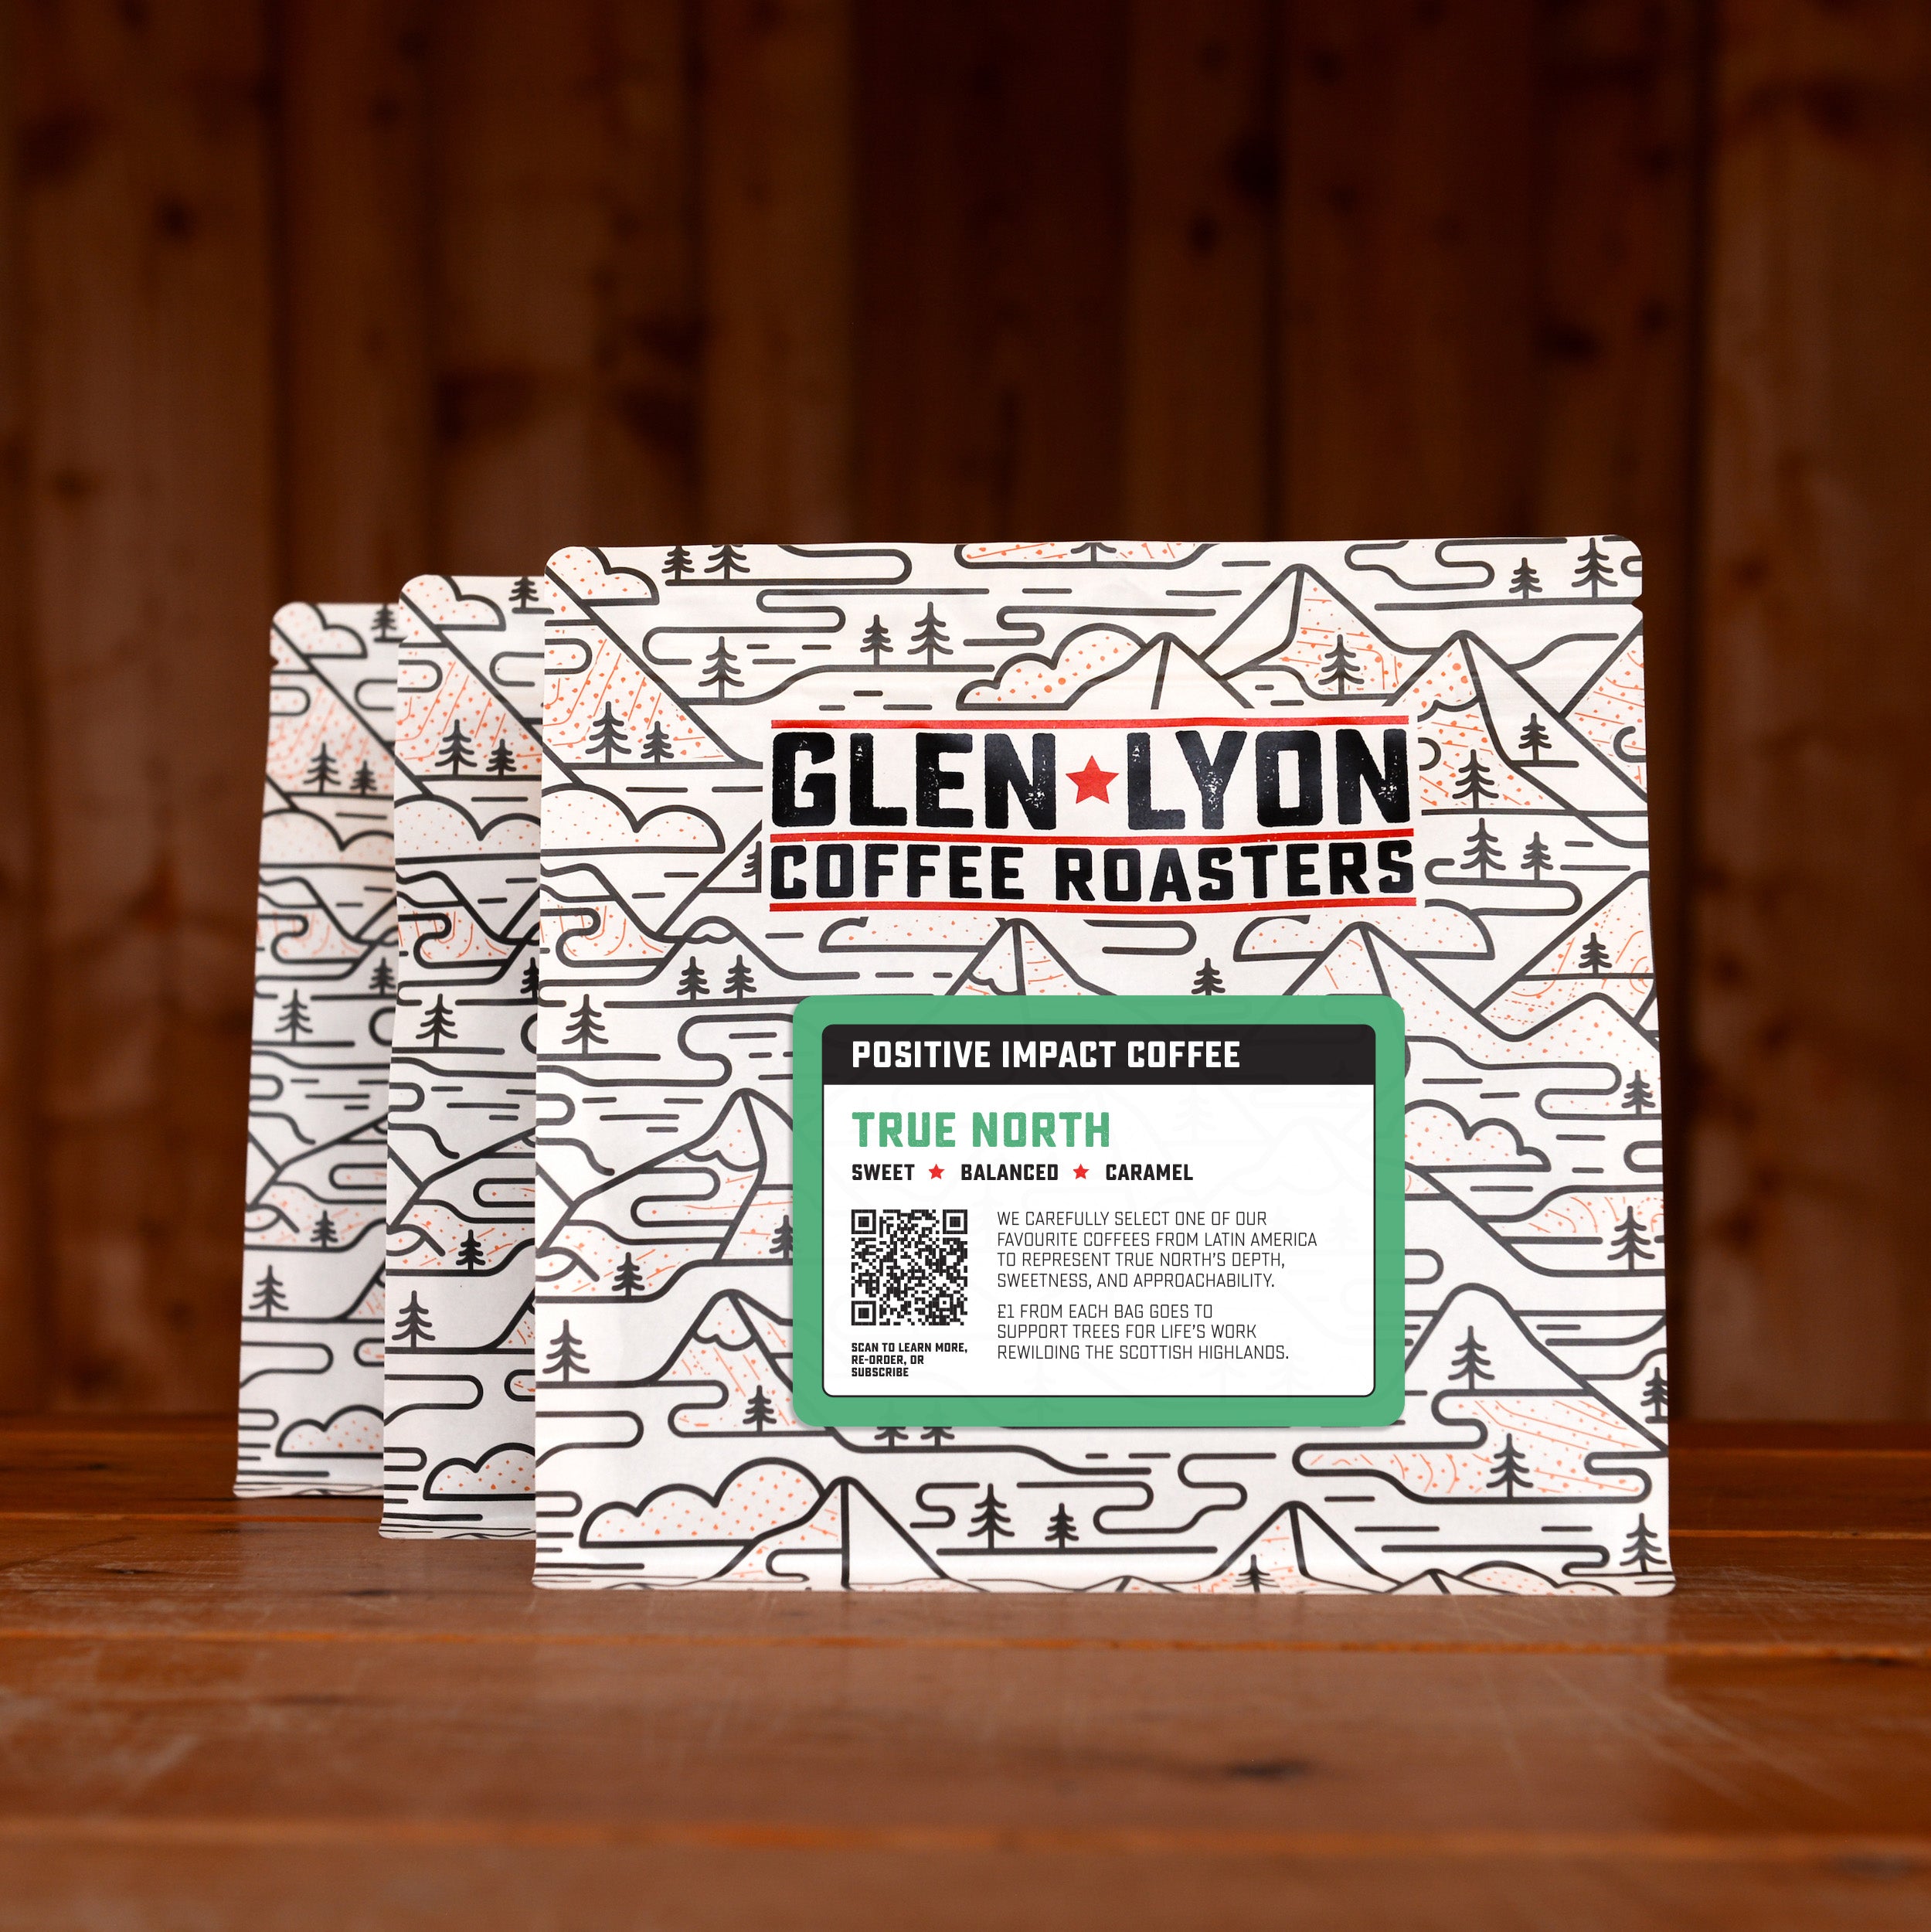 3 bags of True North subscription labelled speciality coffee from Glen Lyon Coffee Roasters against a warm wood-tinged background